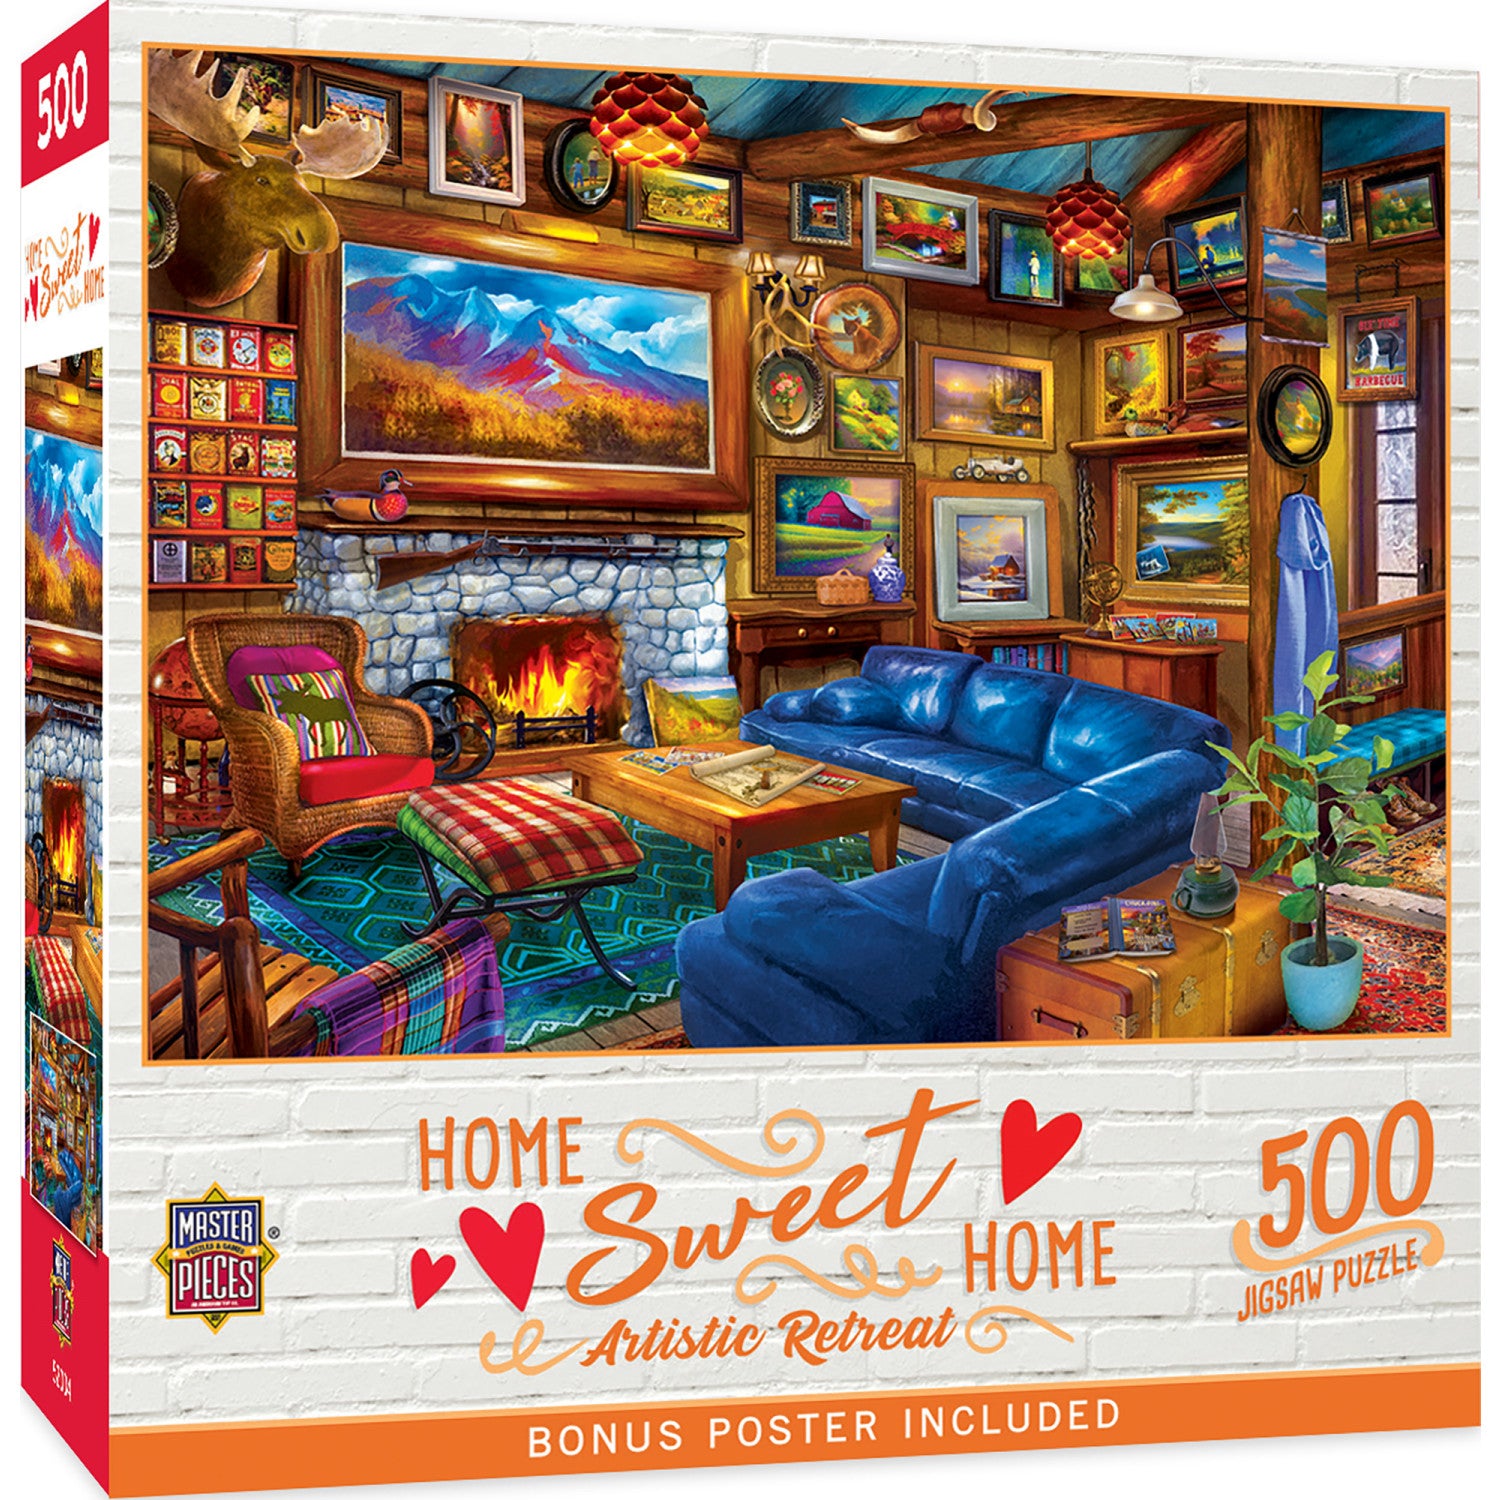 Home Sweet Home - Artistic Retreat 500 Piece Jigsaw Puzzle